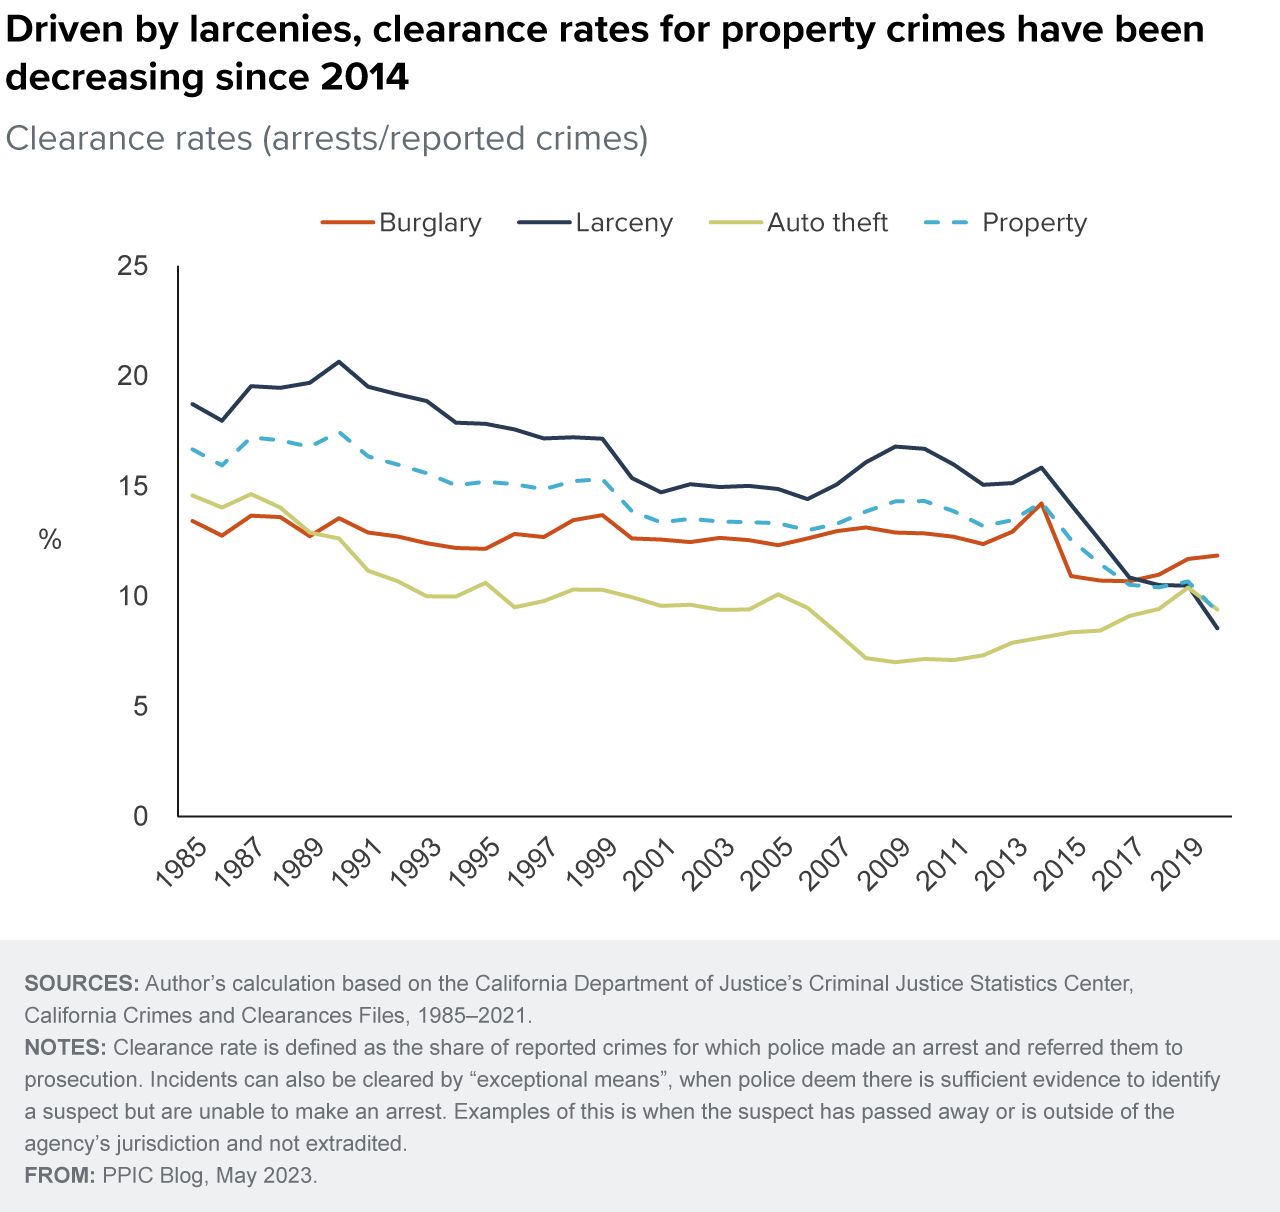 figure - Driven by larcenies, clearance rates for property crimes have been decreasing since 2014